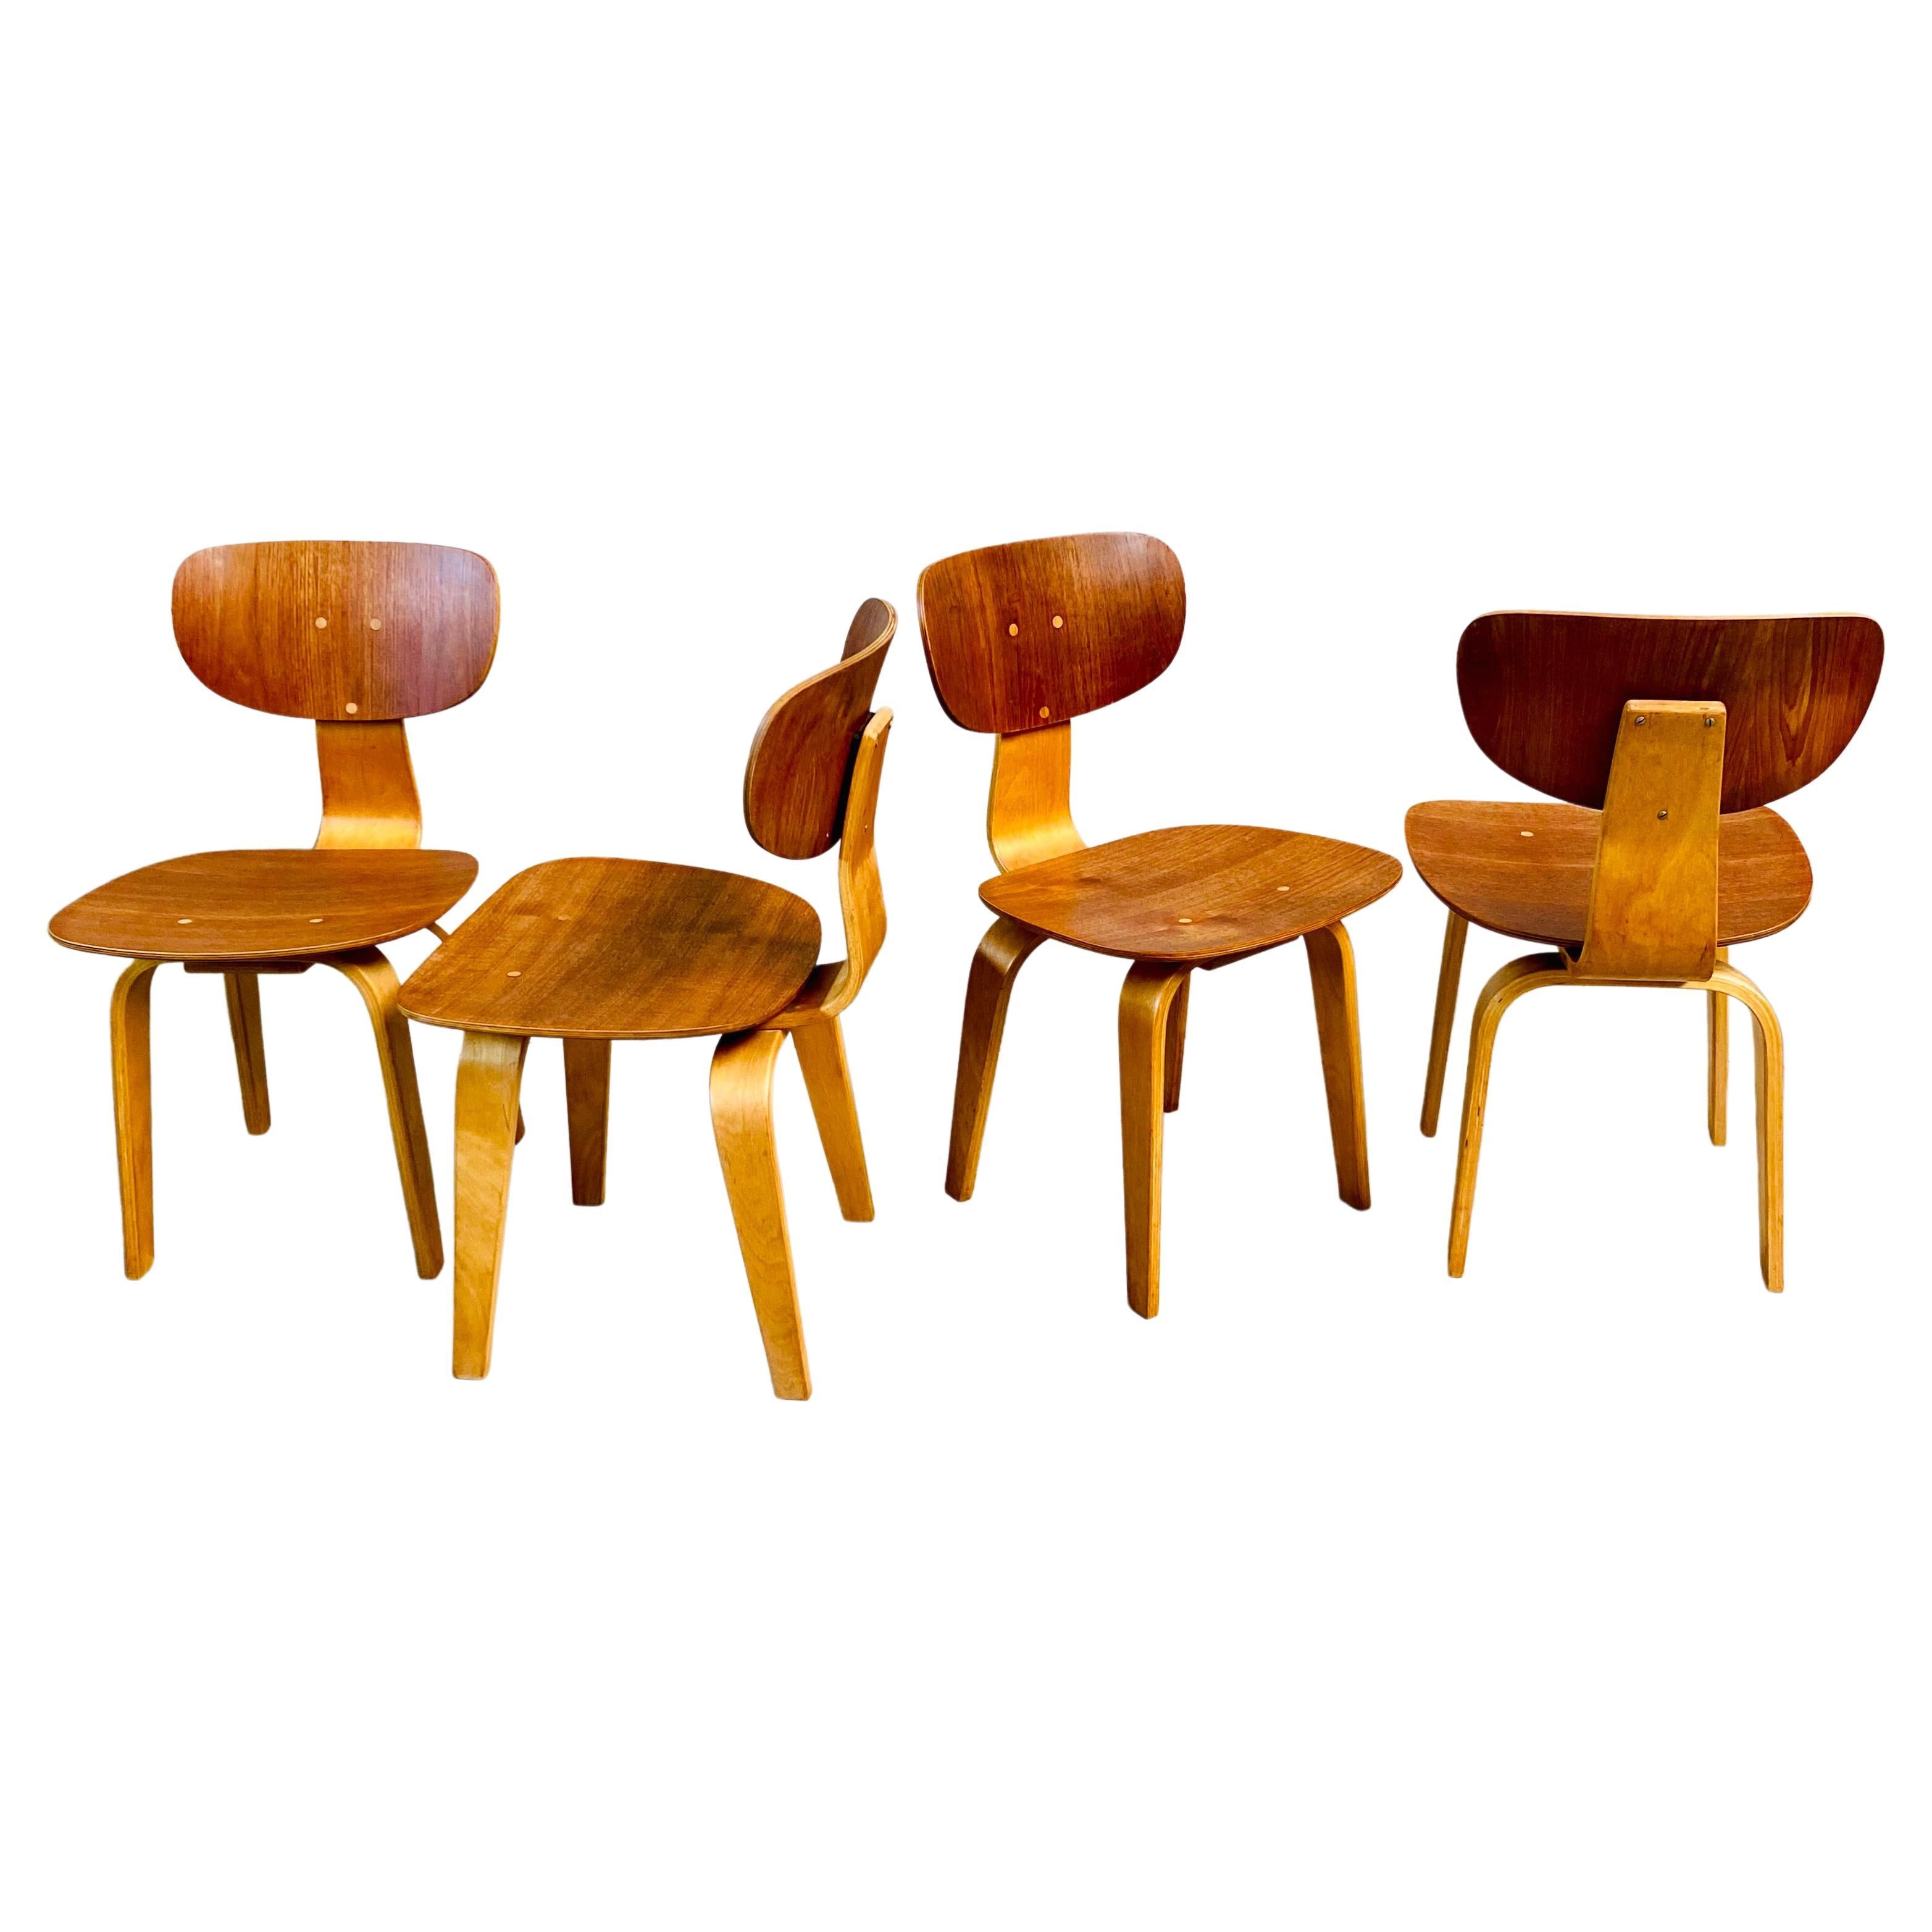 4 x Pastoe SB02 Dining Chairs by Cees Braakman Netherlands 1950